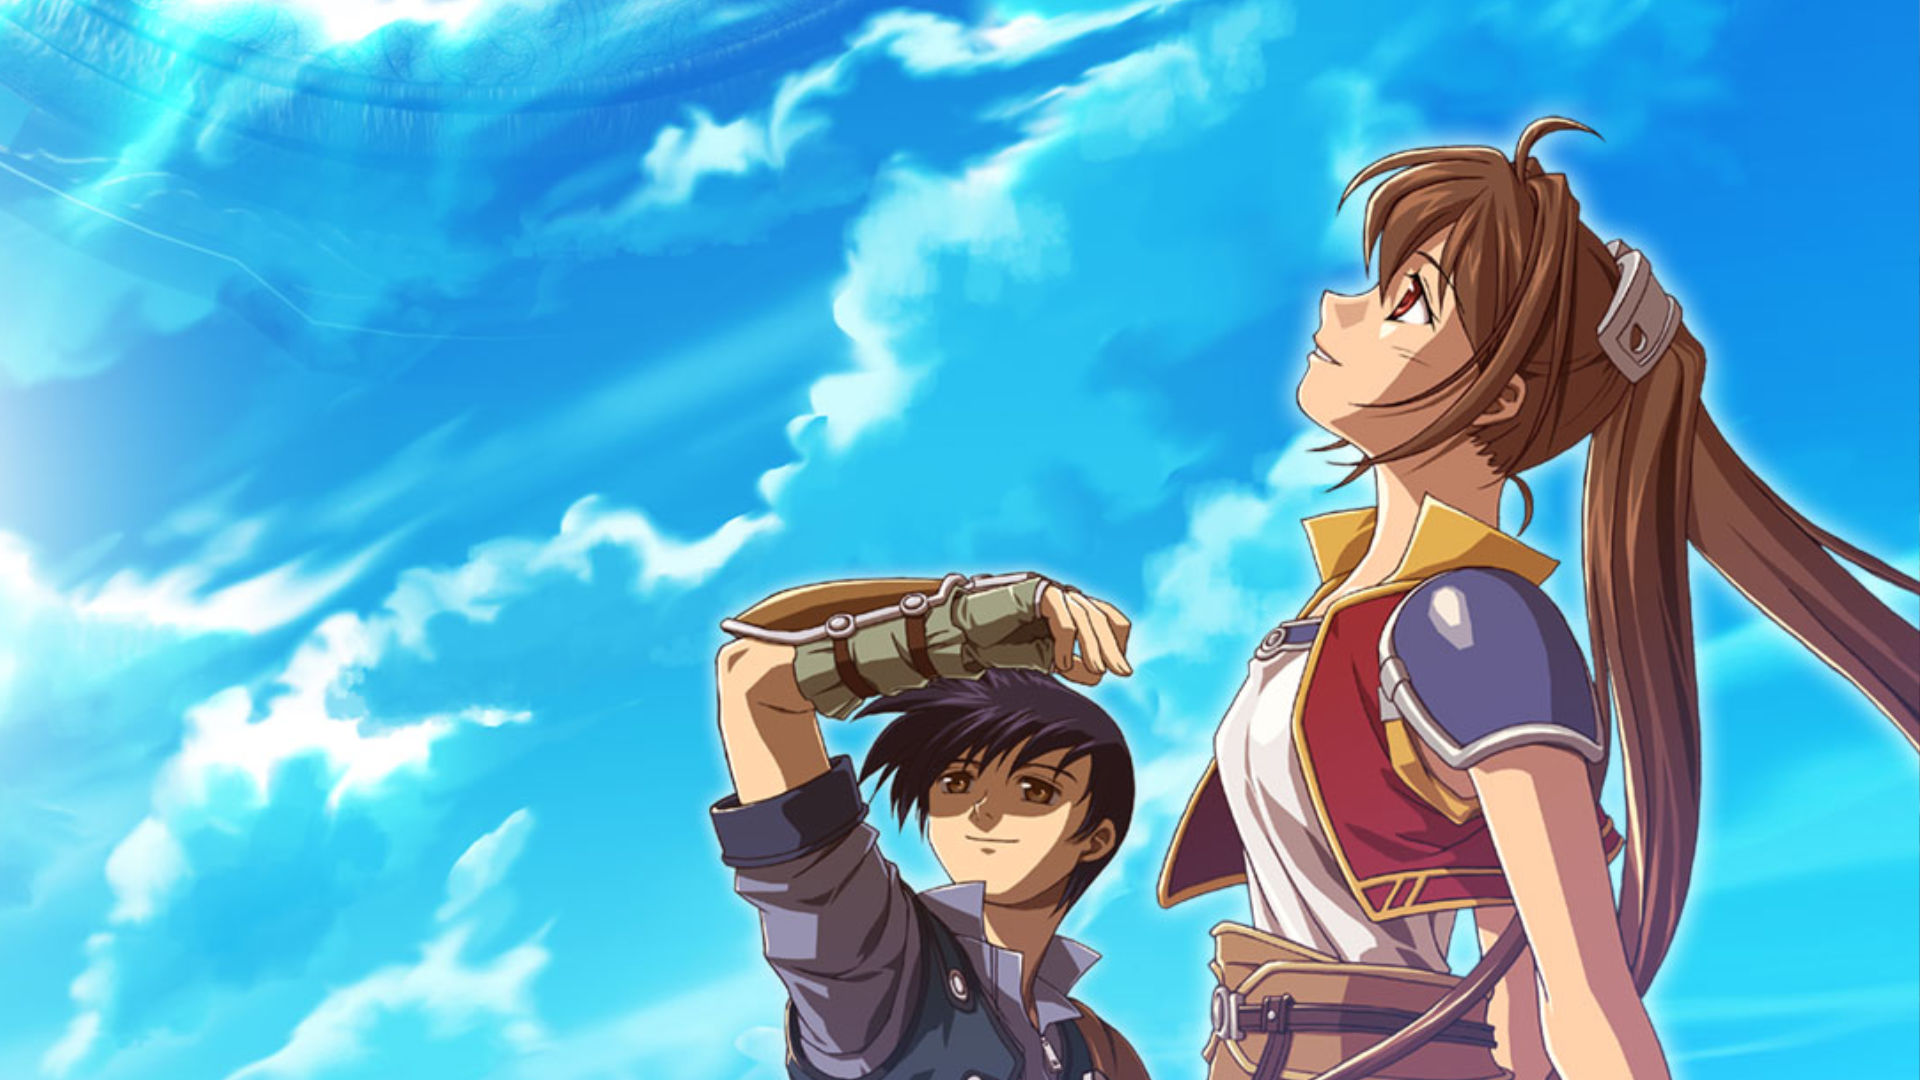 Artwork of The Legend of Heroes: Trails in the Sky FC